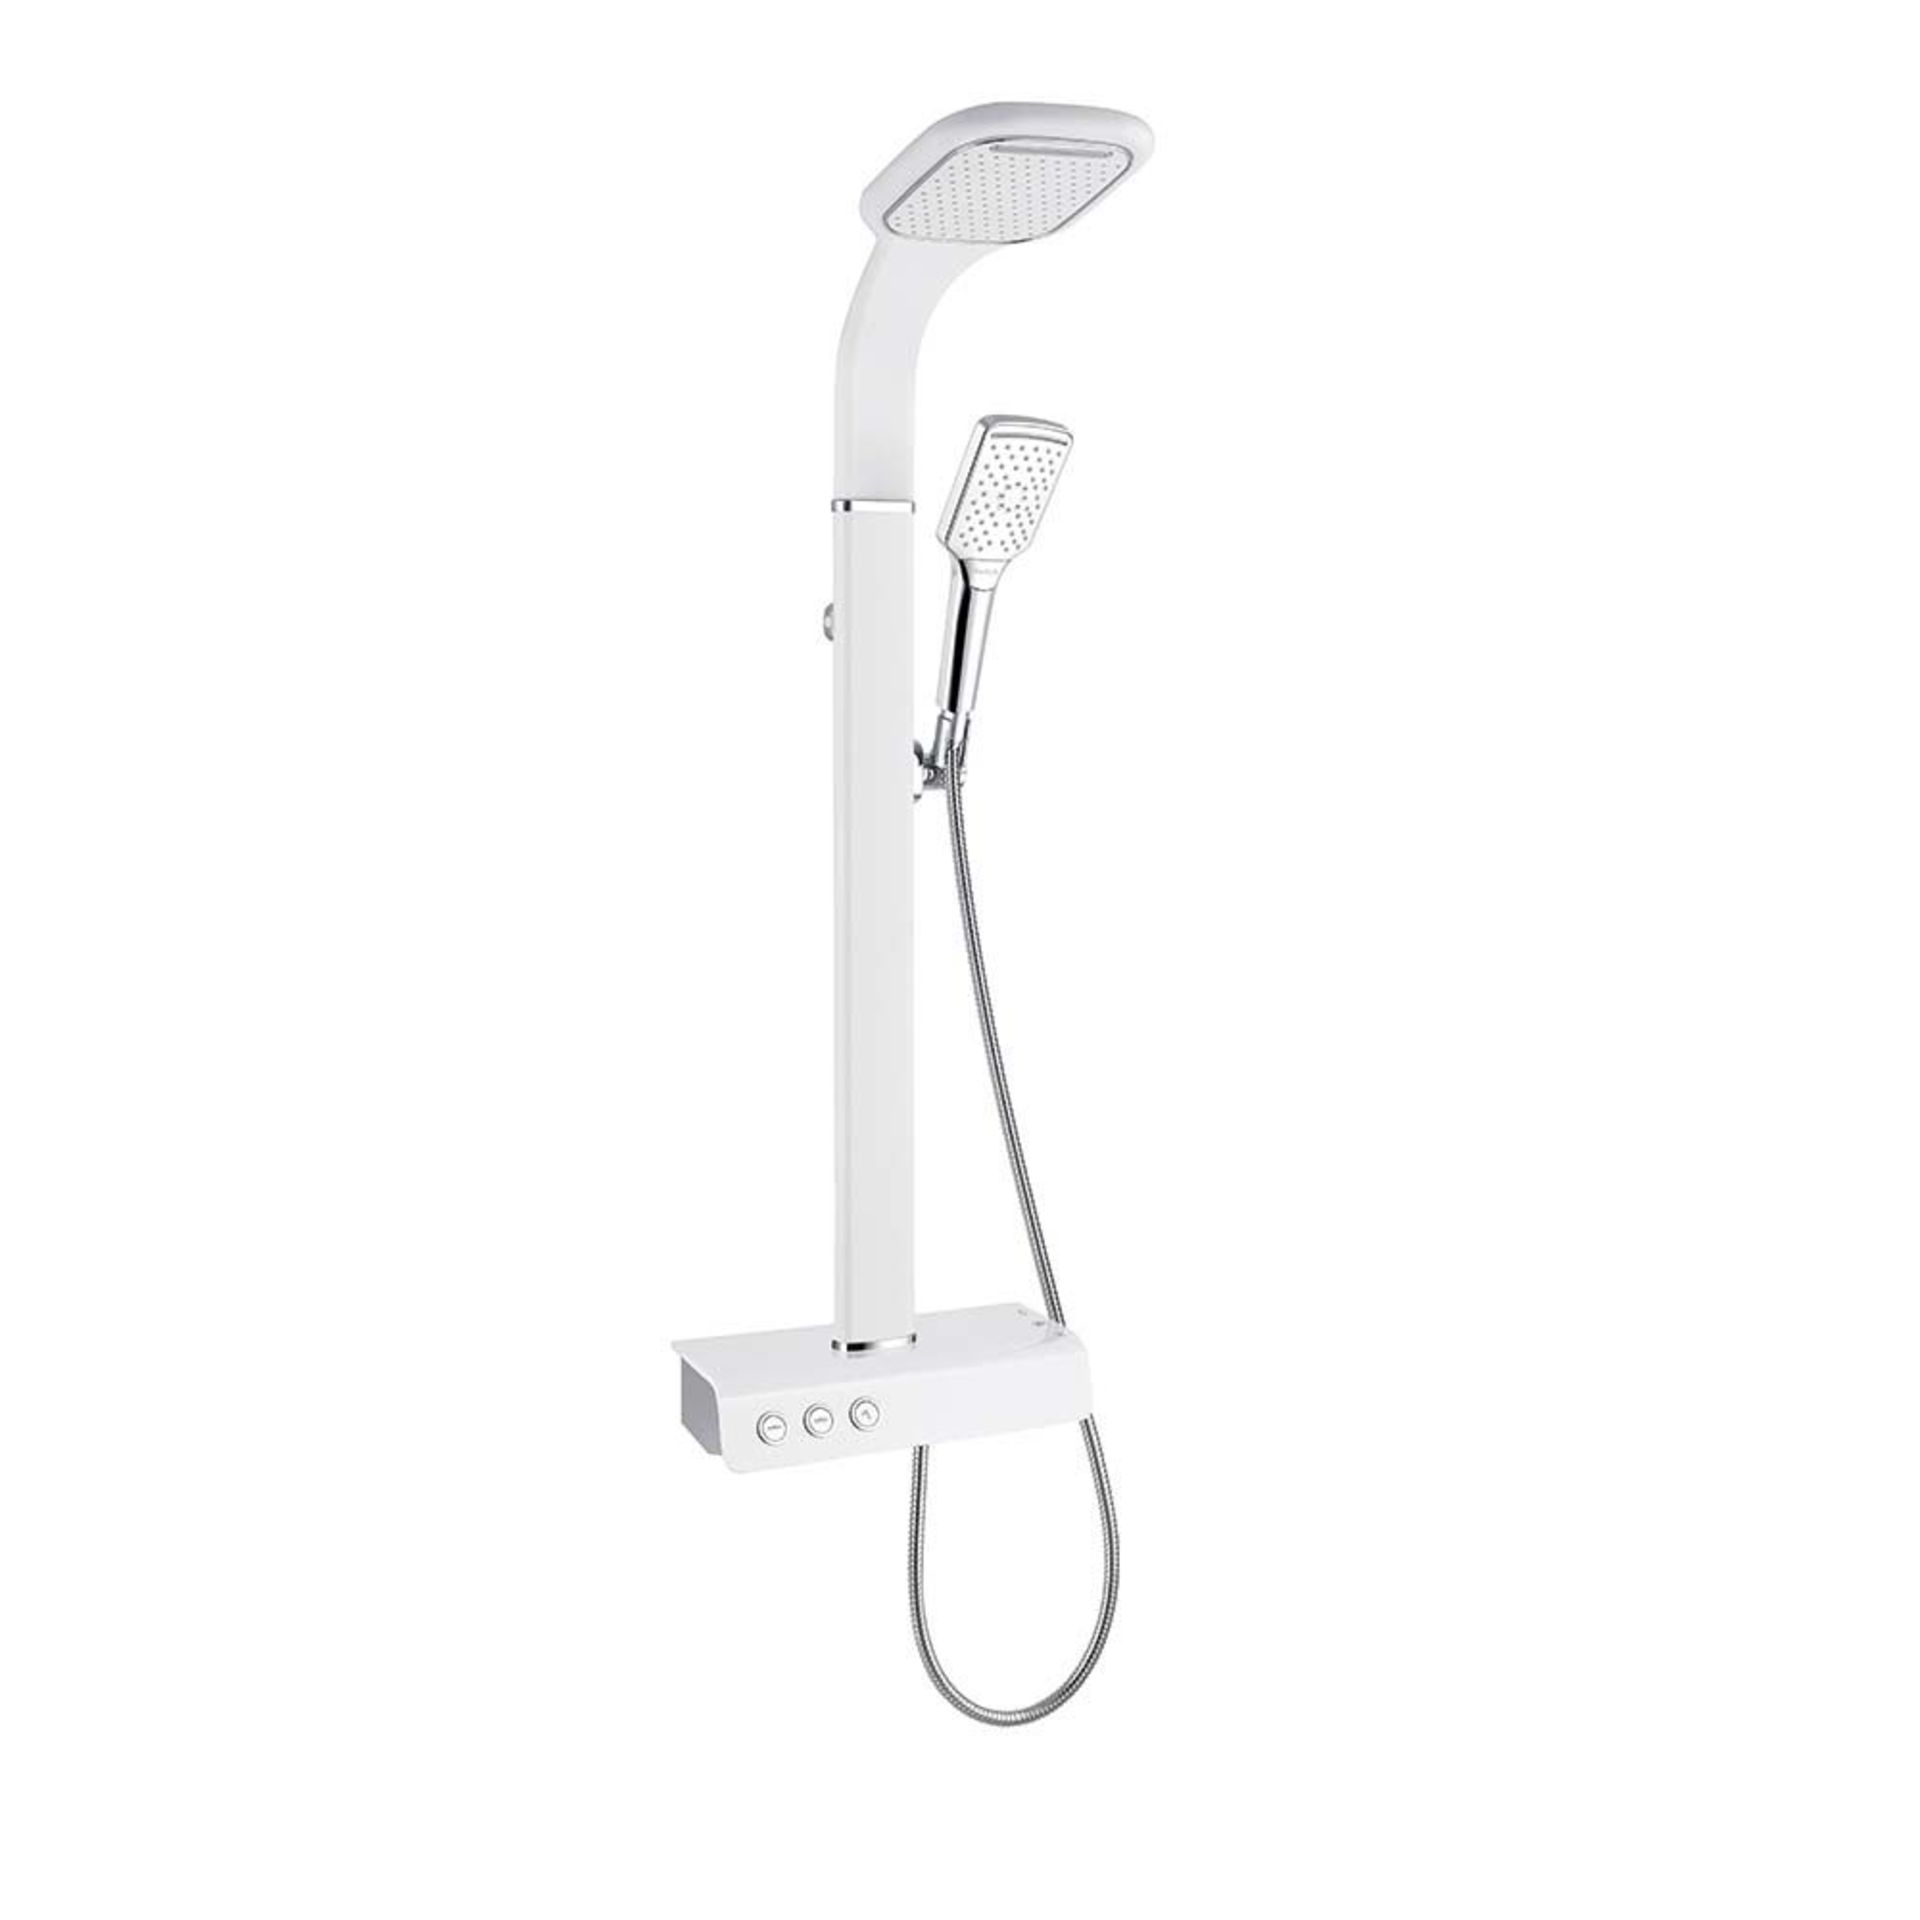 1 x Synergy Nubian White Thermostatic Shower Panel Kit and Handset - New Boxed Stock - RRP £549! - Image 2 of 6